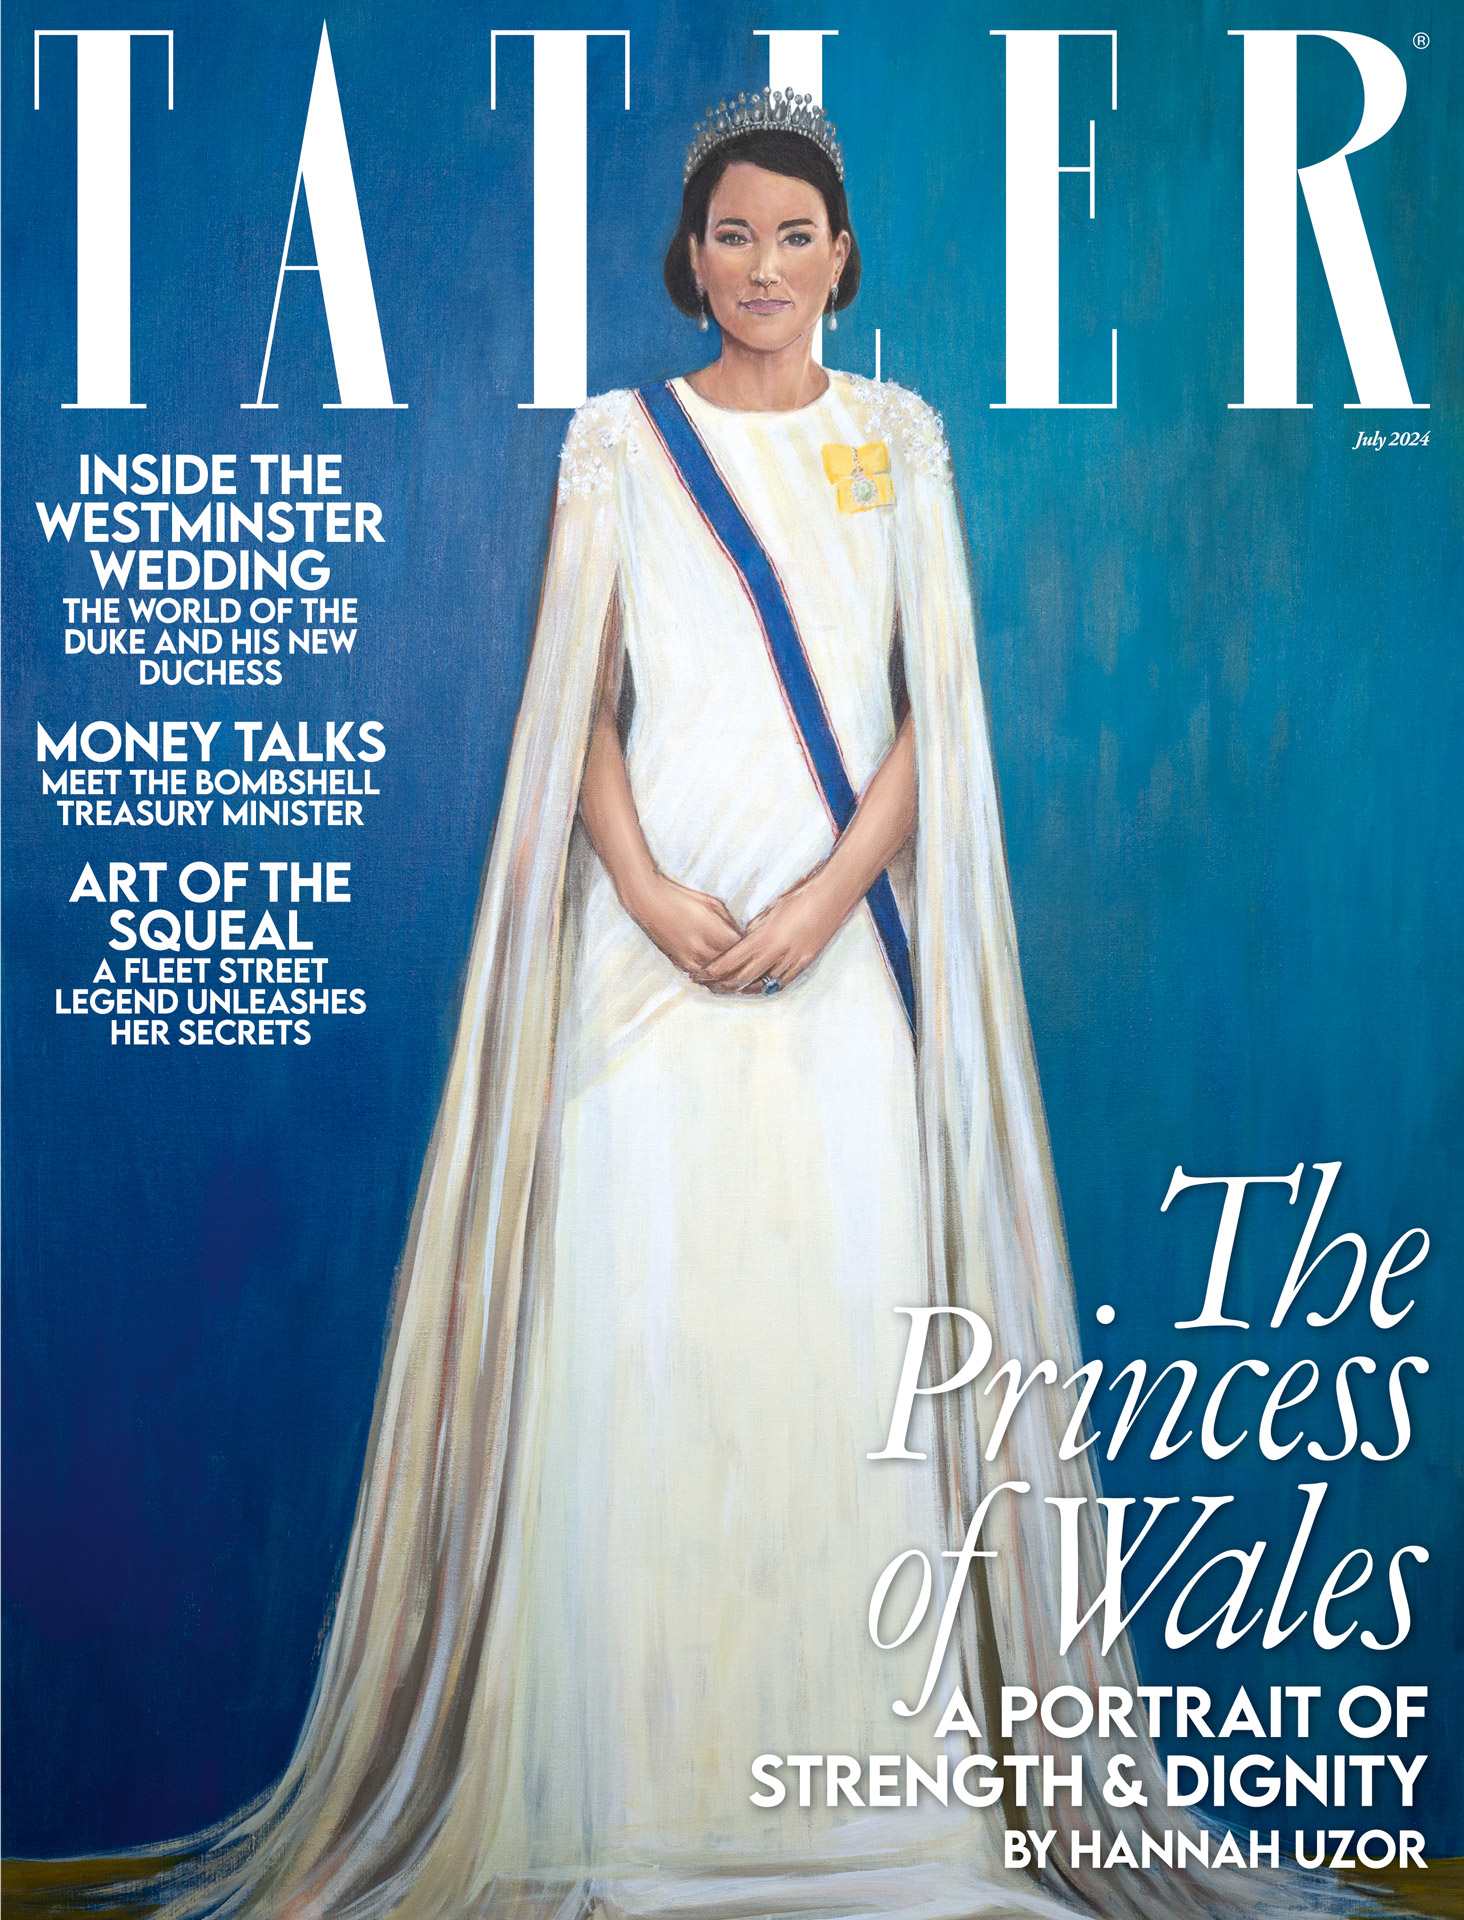 The Tatler July 2024 cover featuring Hannah Uzor's portrait of the princess 